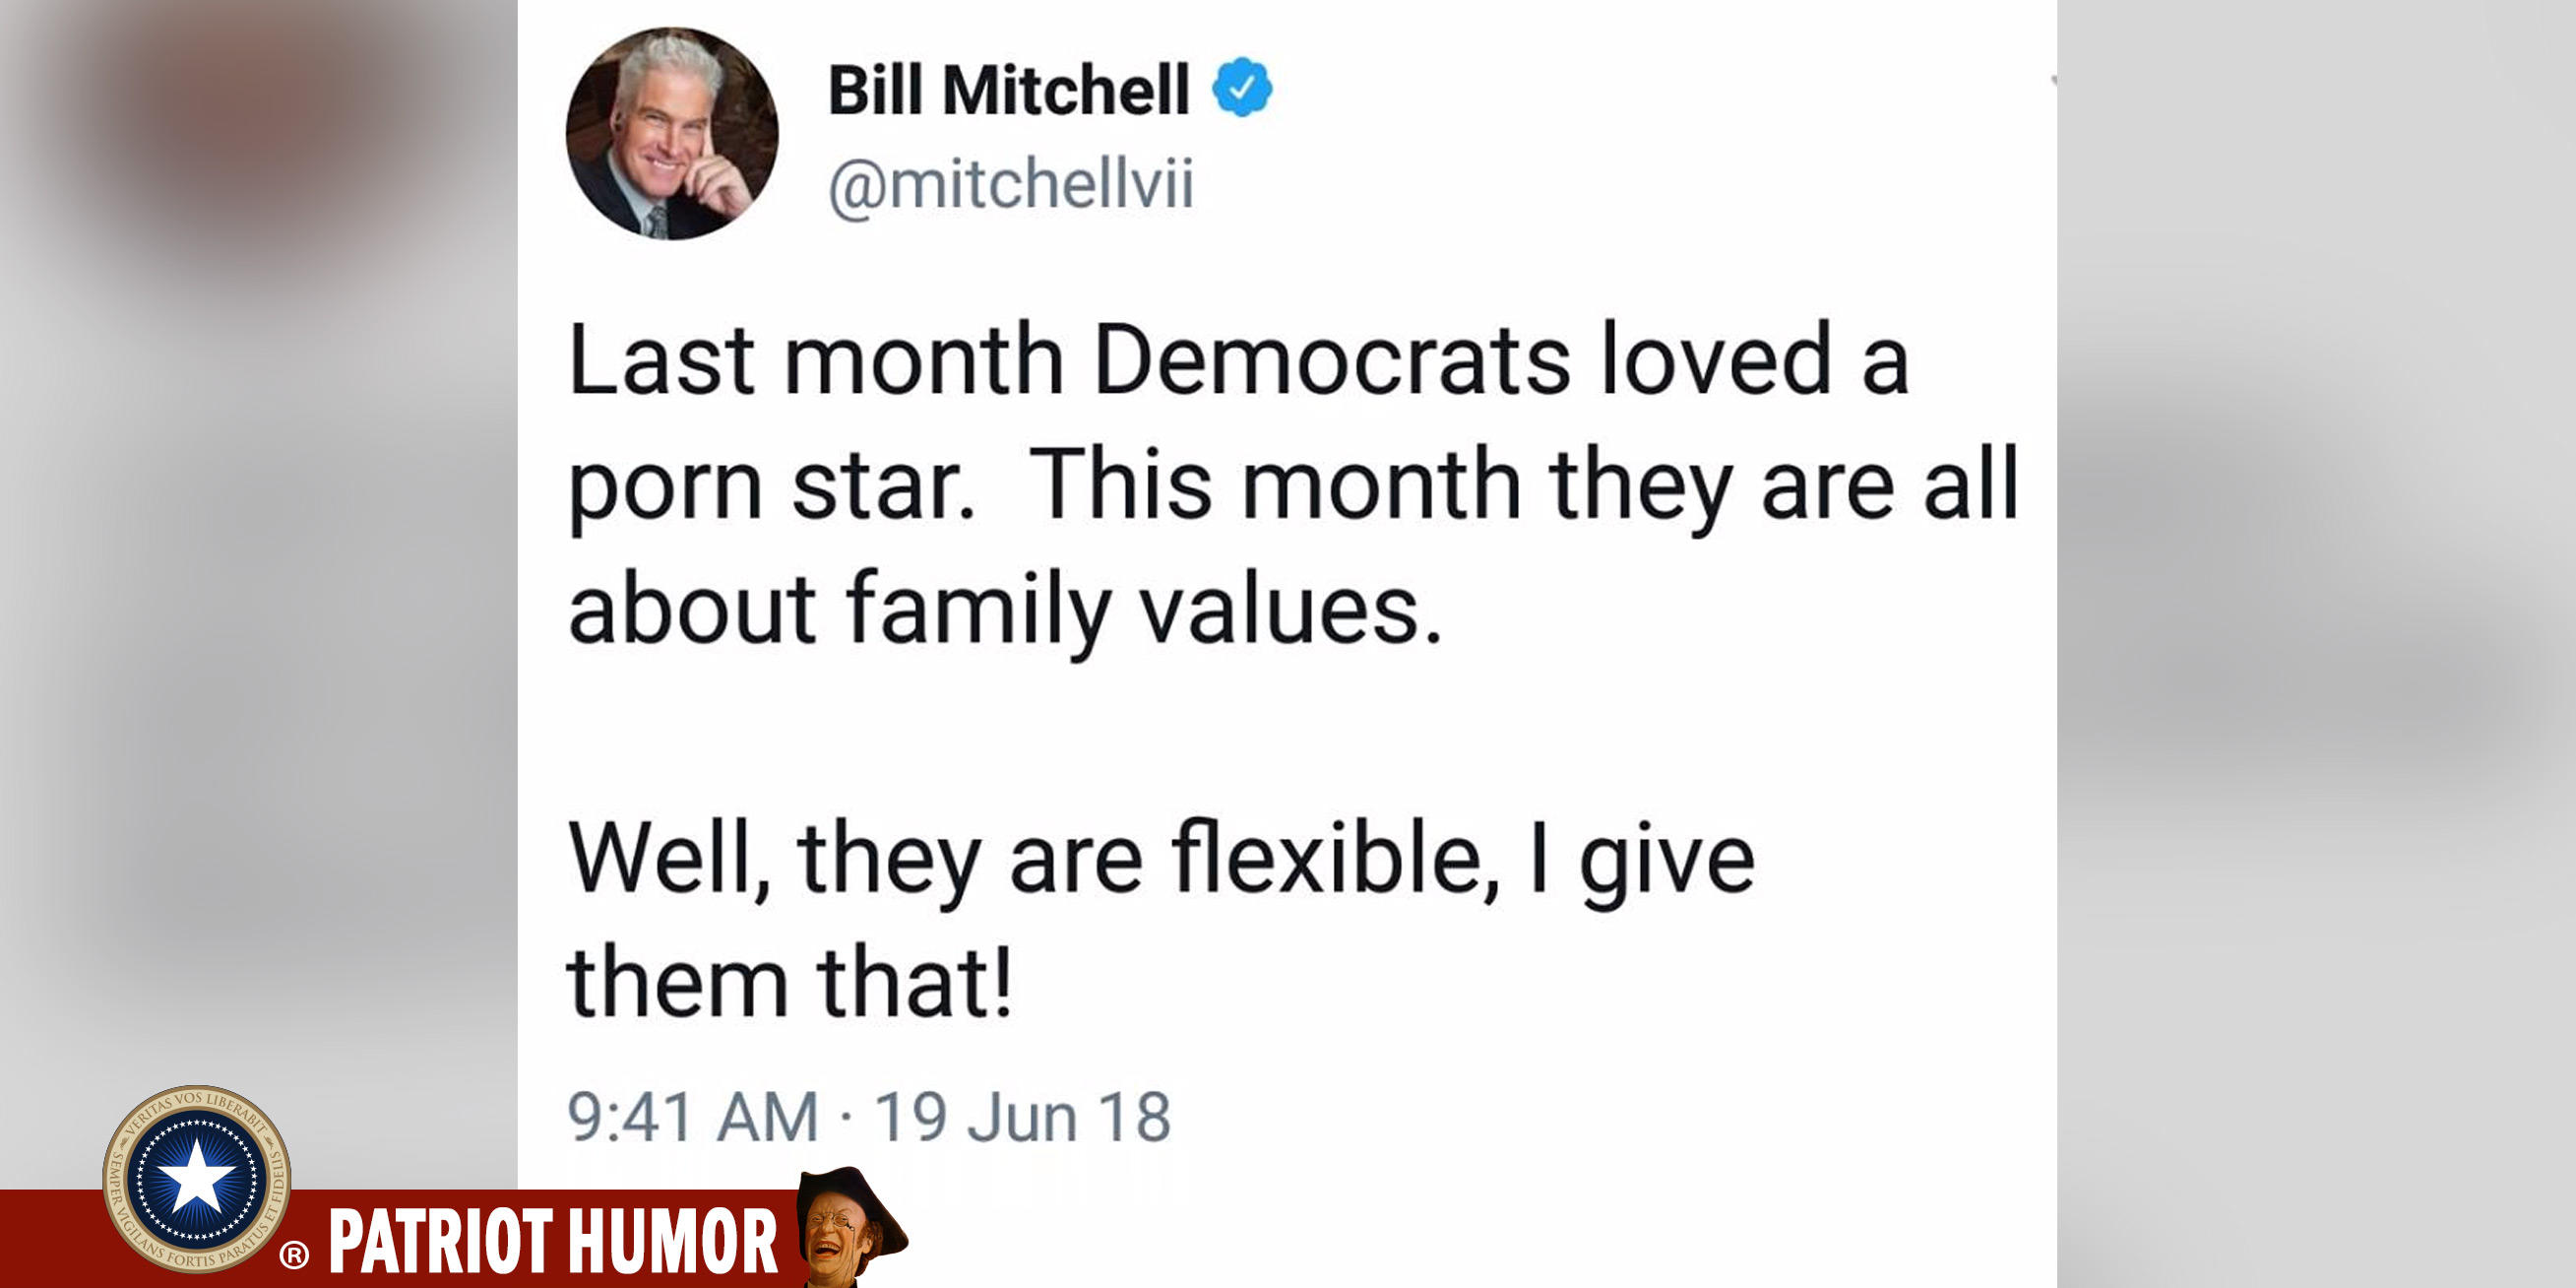 material - Bill Mitchell Last month Democrats loved a porn star. This month they are all about family values. Well, they are flexible, I give them that! 19 Jun 18 Patriot Humor S Vos Libed Iberabit Veritas Semper Dels Tus Et Fid Gilans Ans For Tis Parat